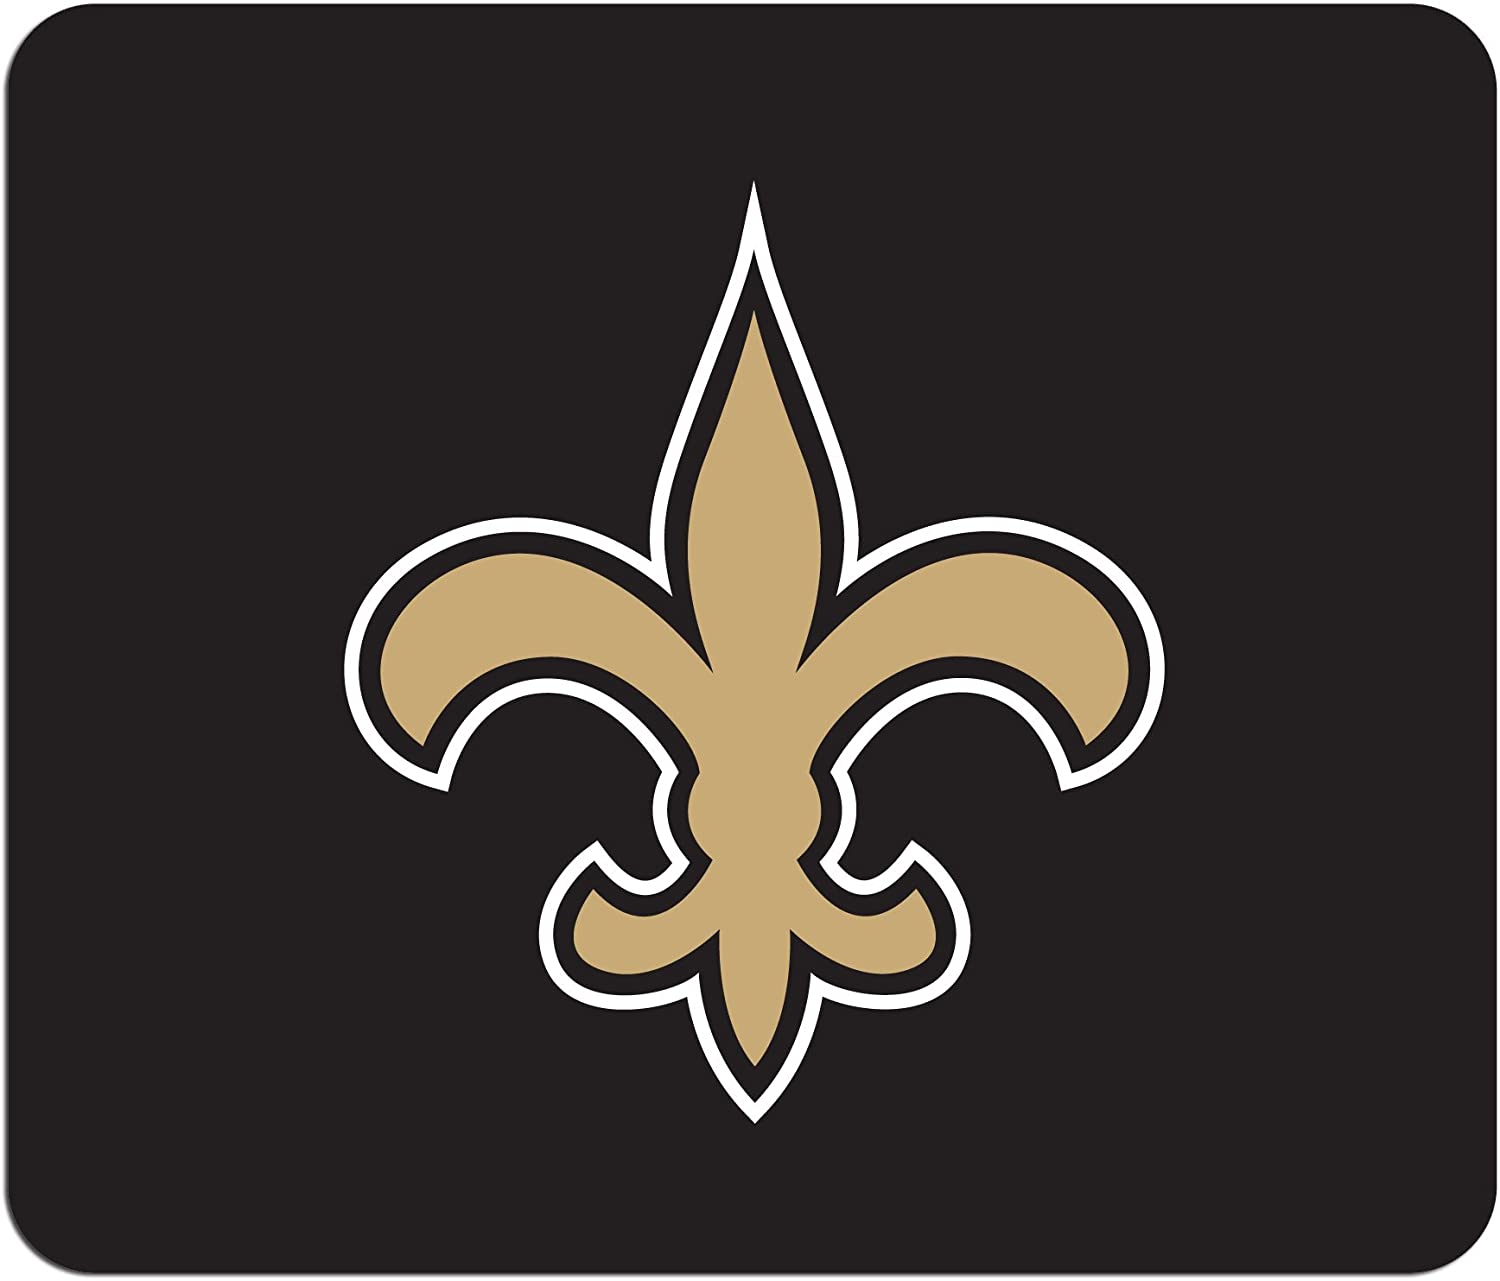 New Orleans Saints Injury Report: 4 Players ruled OUT vs. Detroit Lions